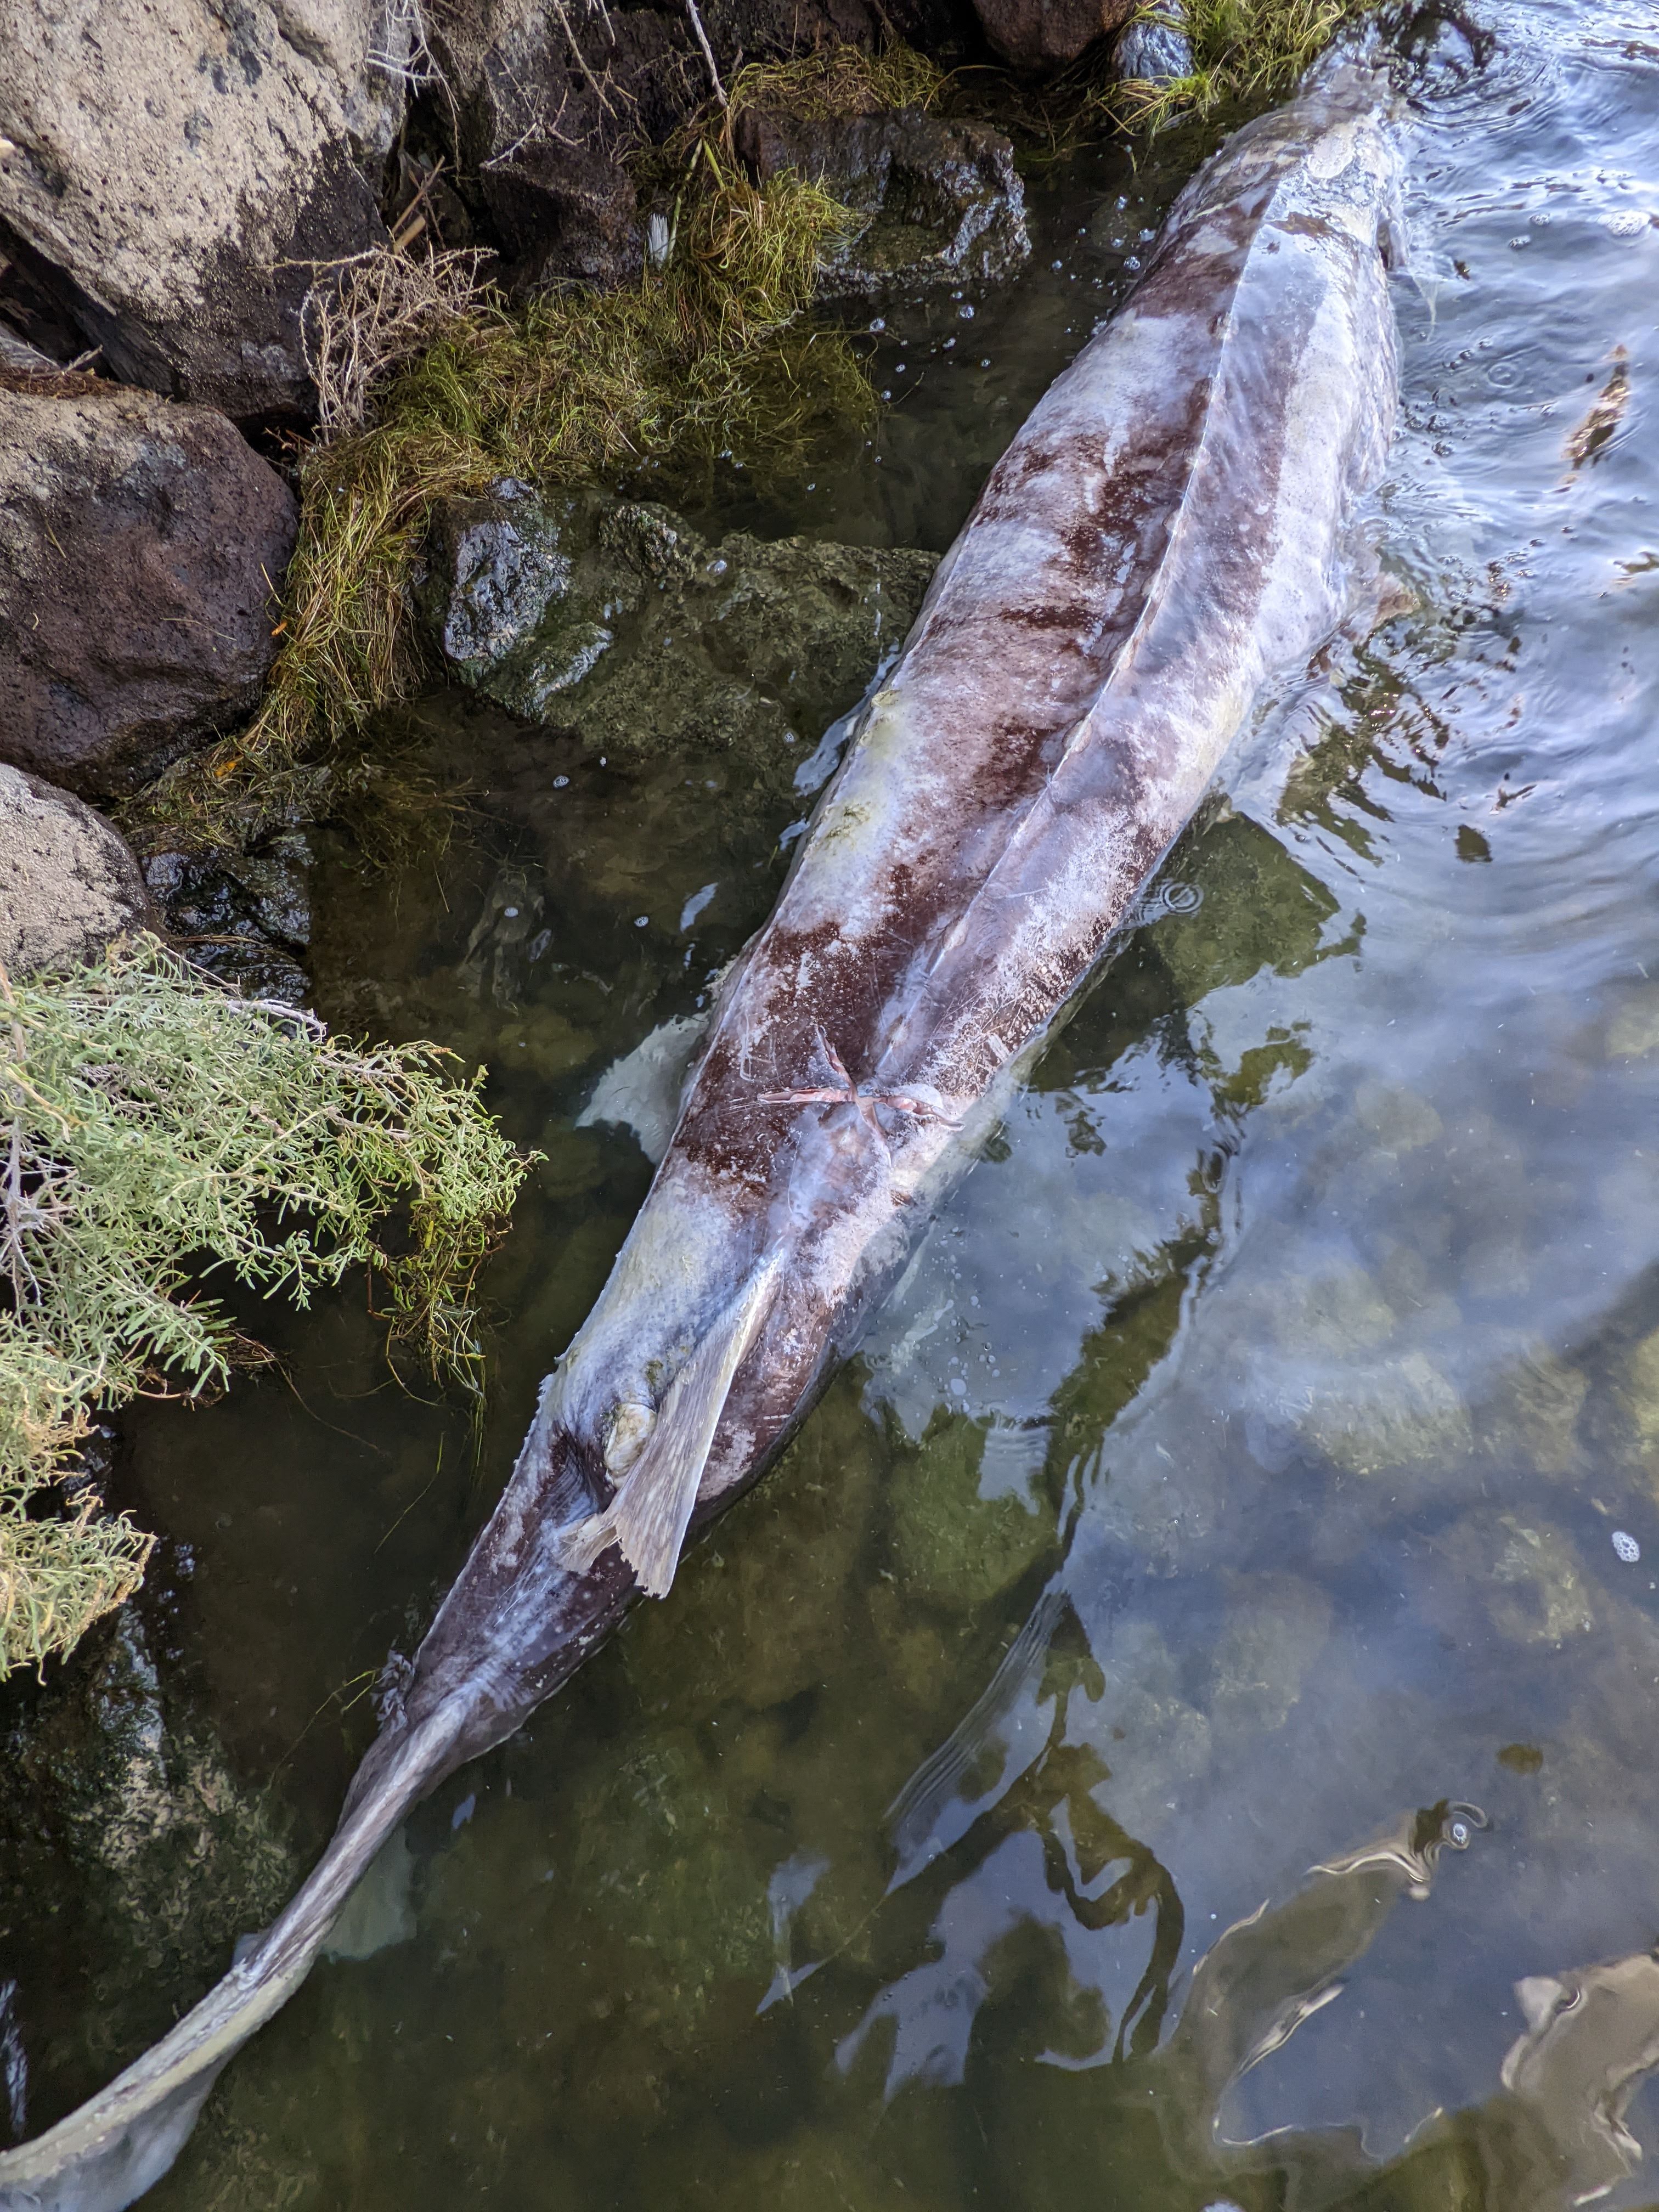 Report a Stranded, Injured, or Dead Sturgeon